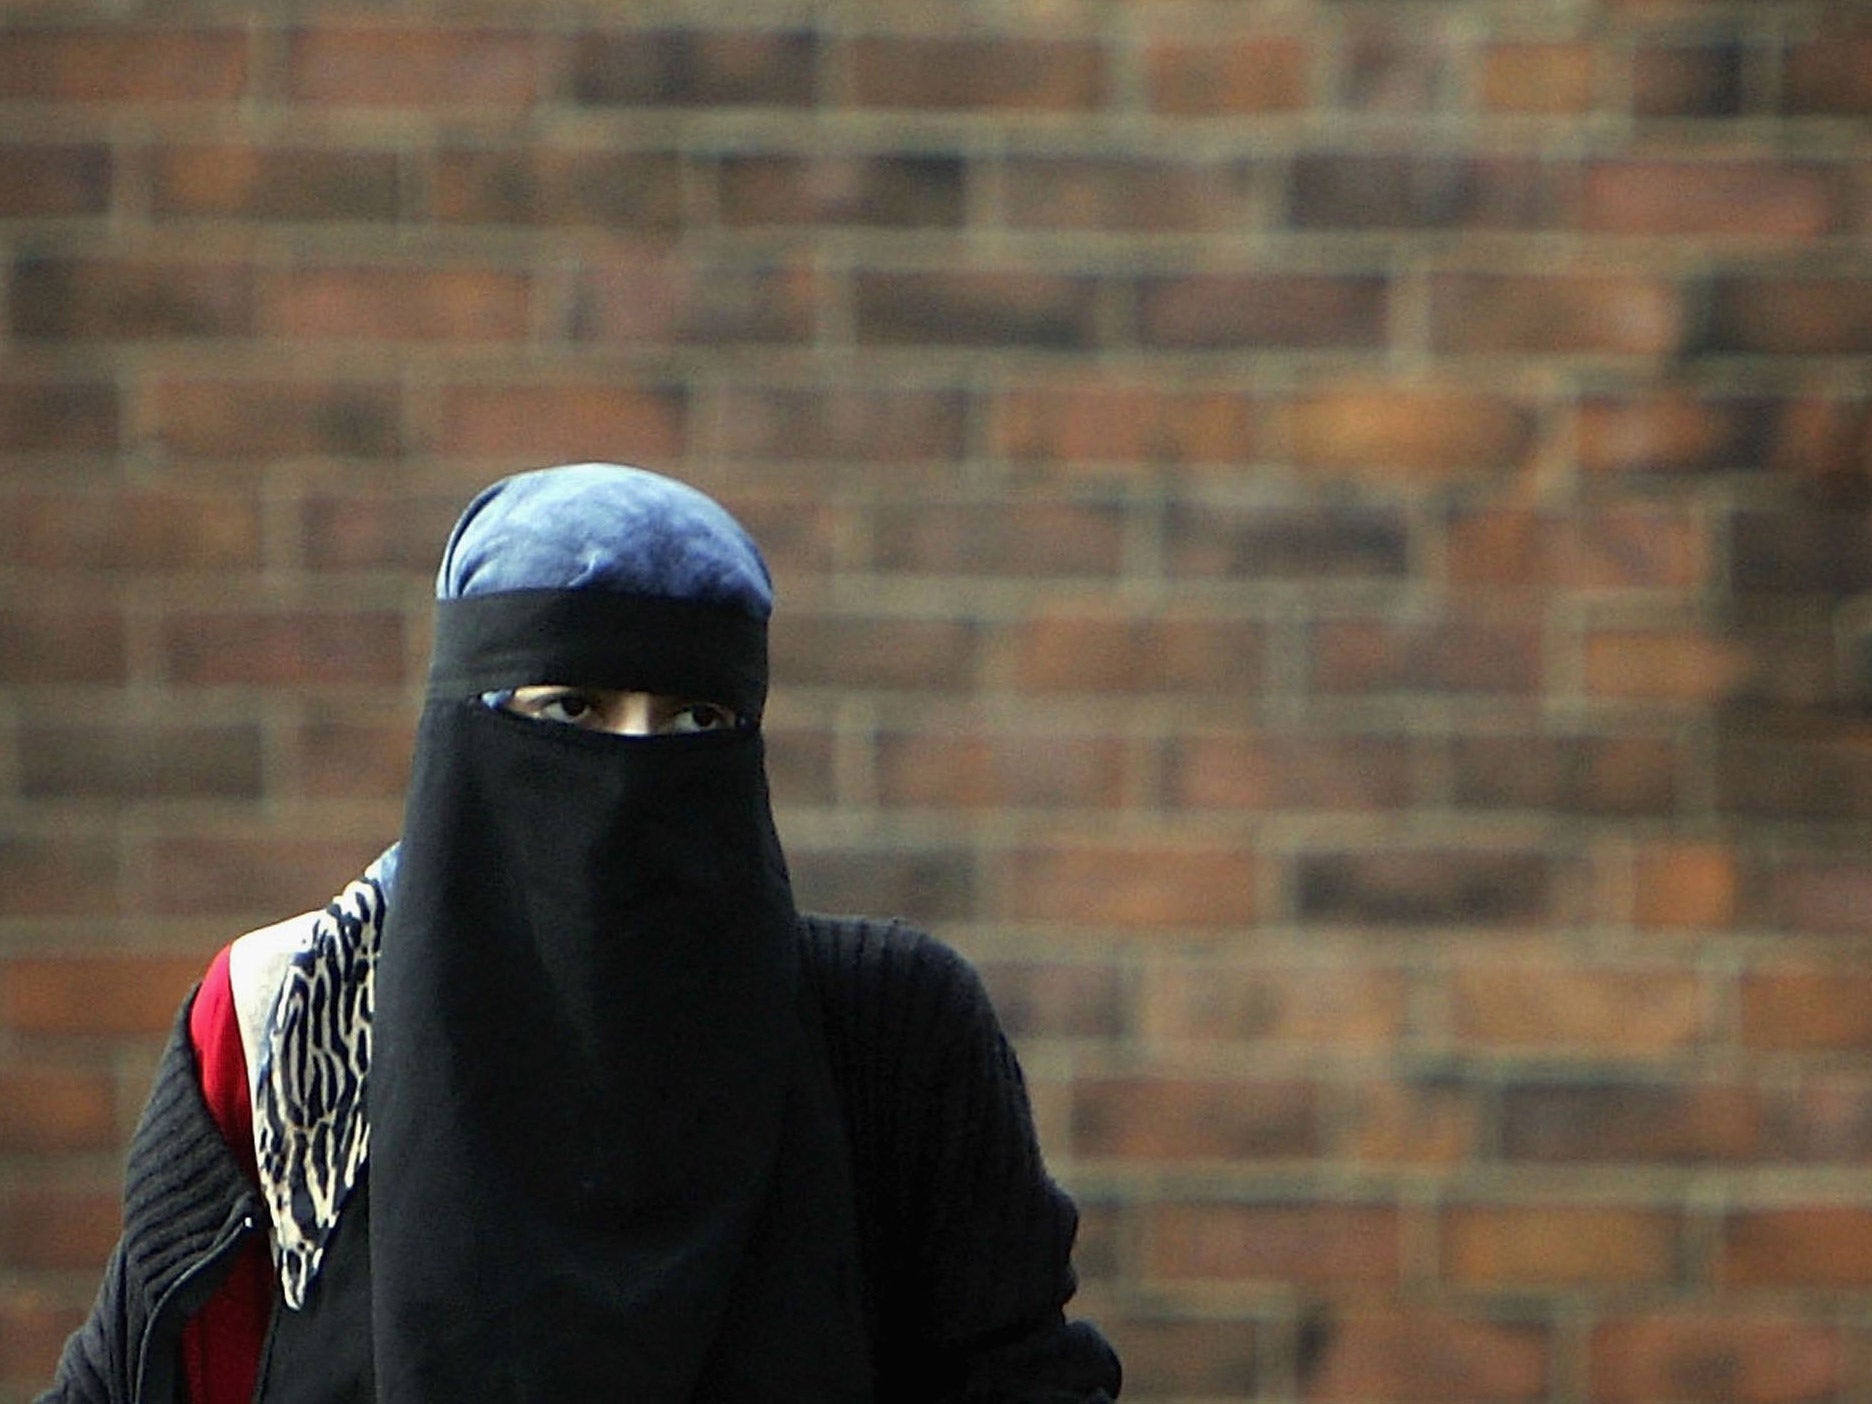 An adult education centre in Copenhagen has barred students from wearing the niqab in the classroom.